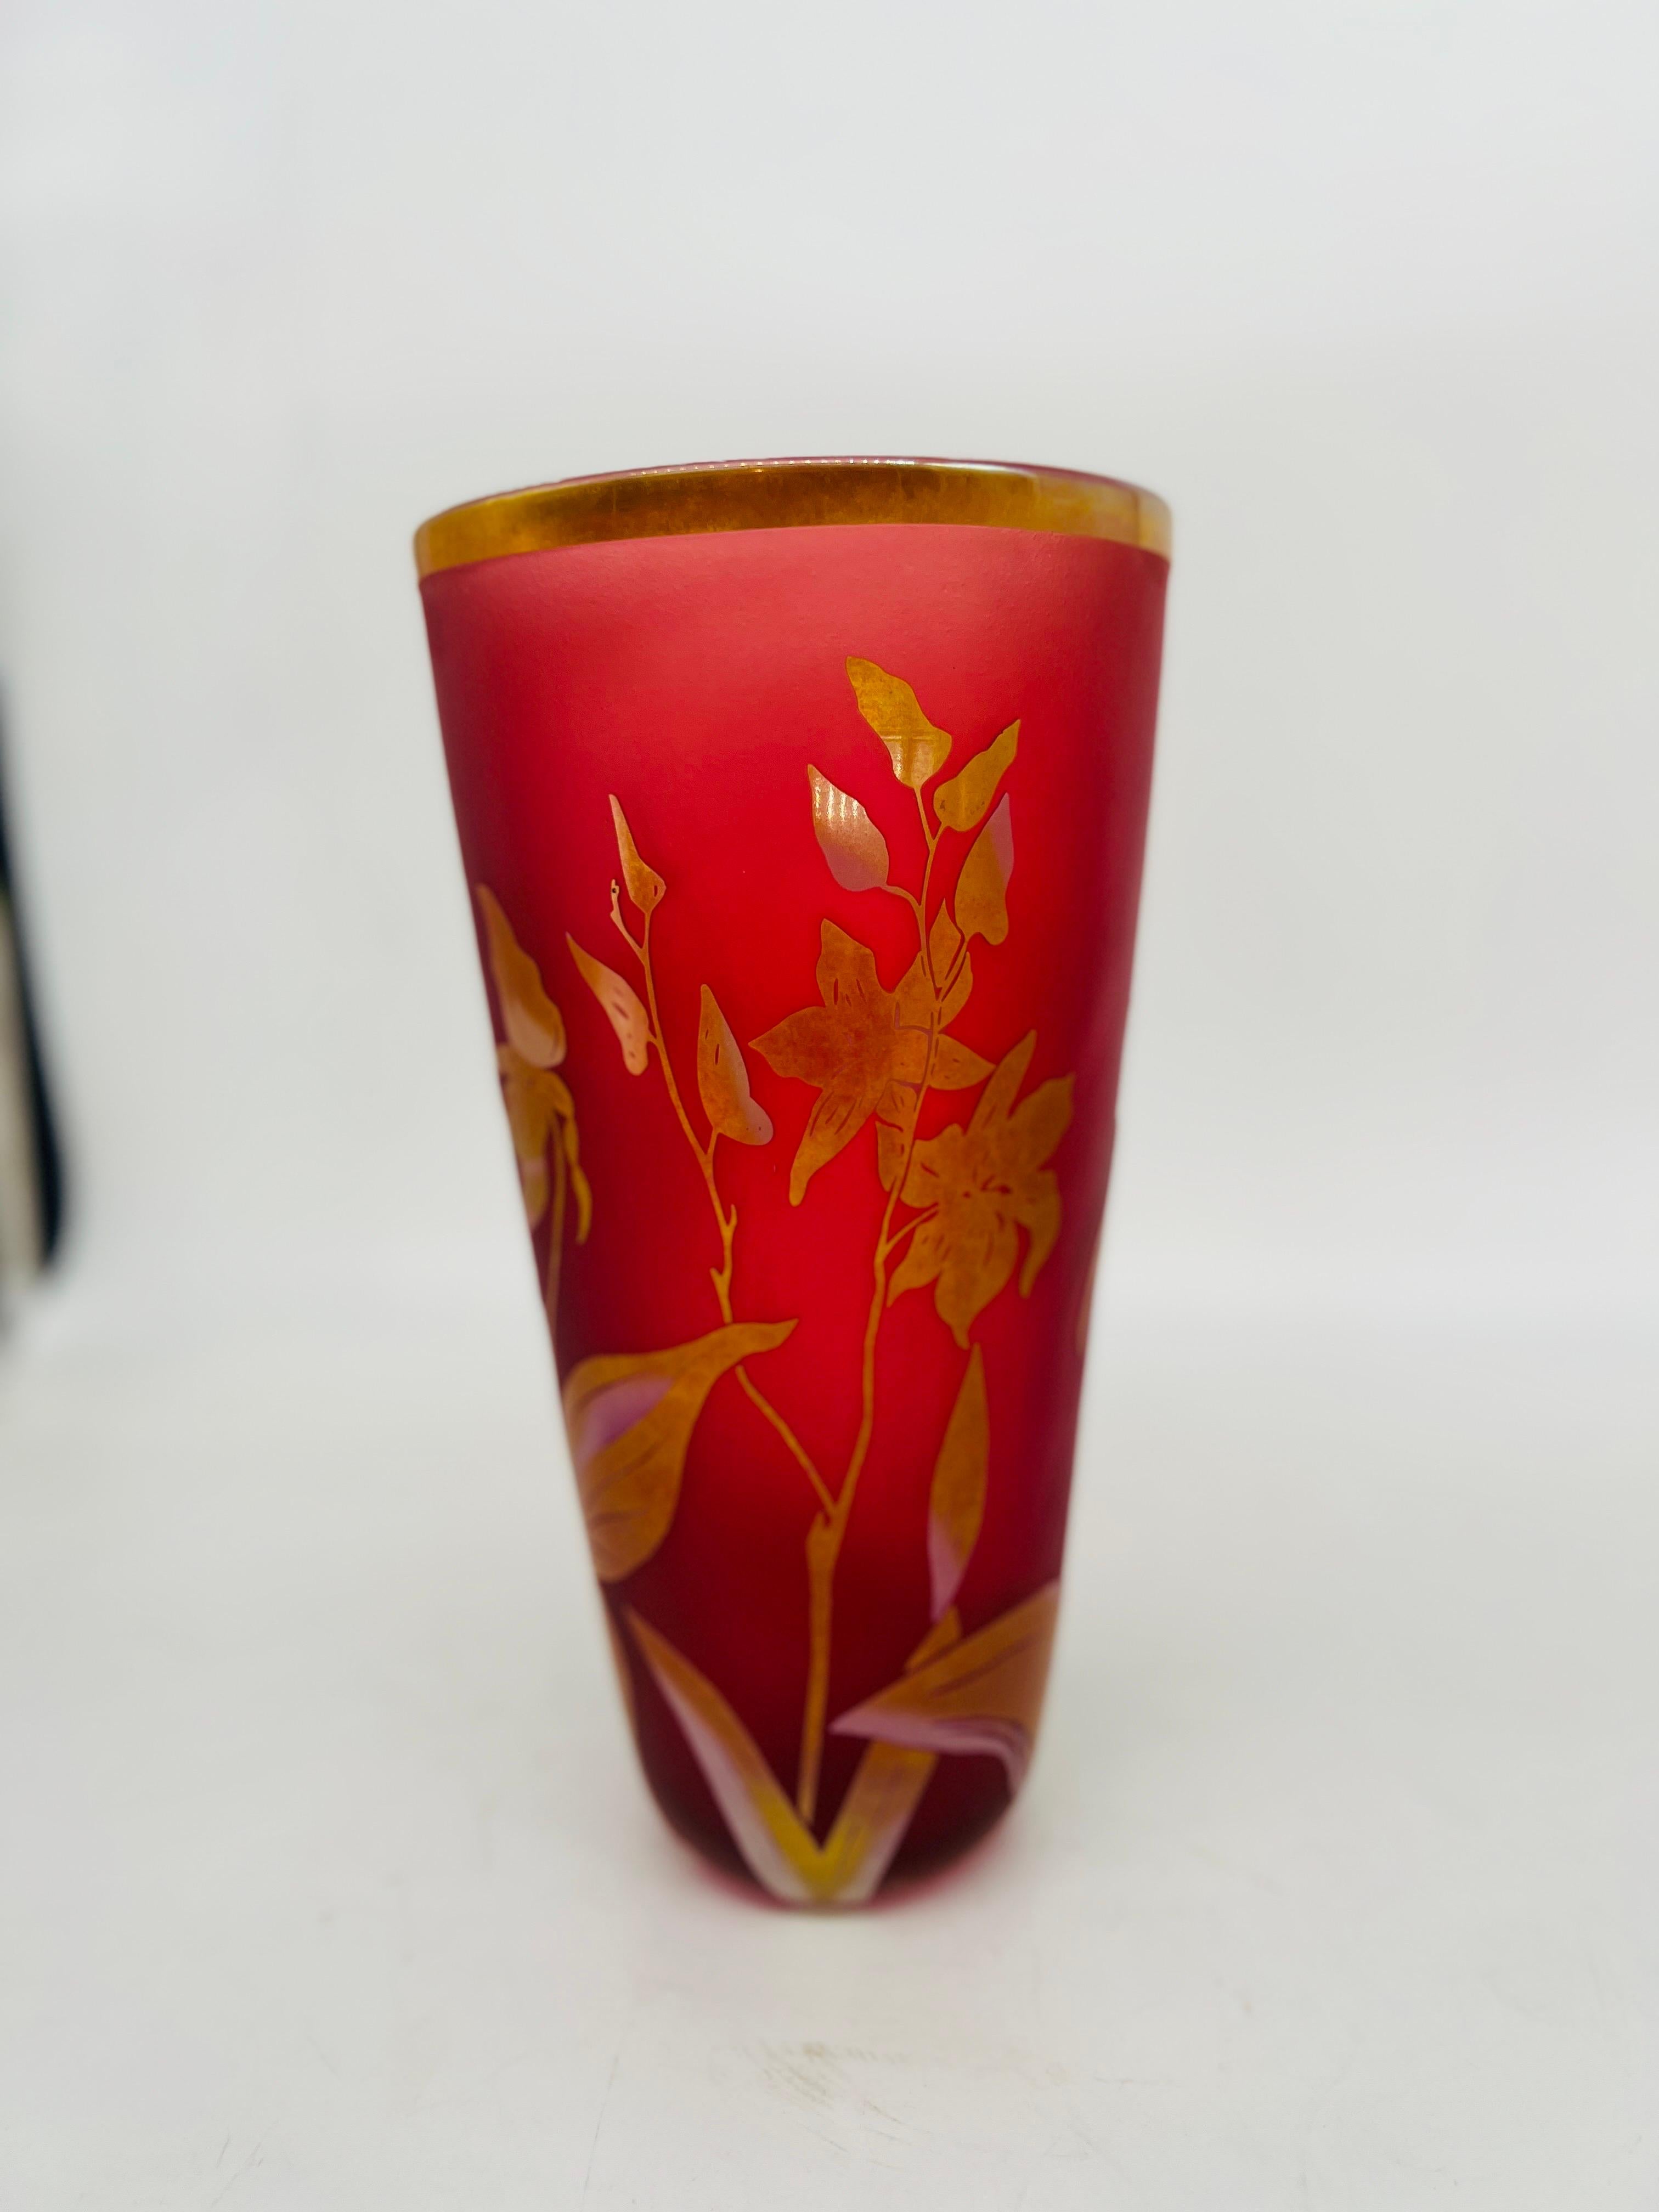 The Steven Correia Limited Edition Studio Art Glass Vase, created circa 2005, is a remarkable piece of collectible art. Crafted by renowned glass artist Steven Correia, this vase showcases his mastery of the art form and attention to detail.

This